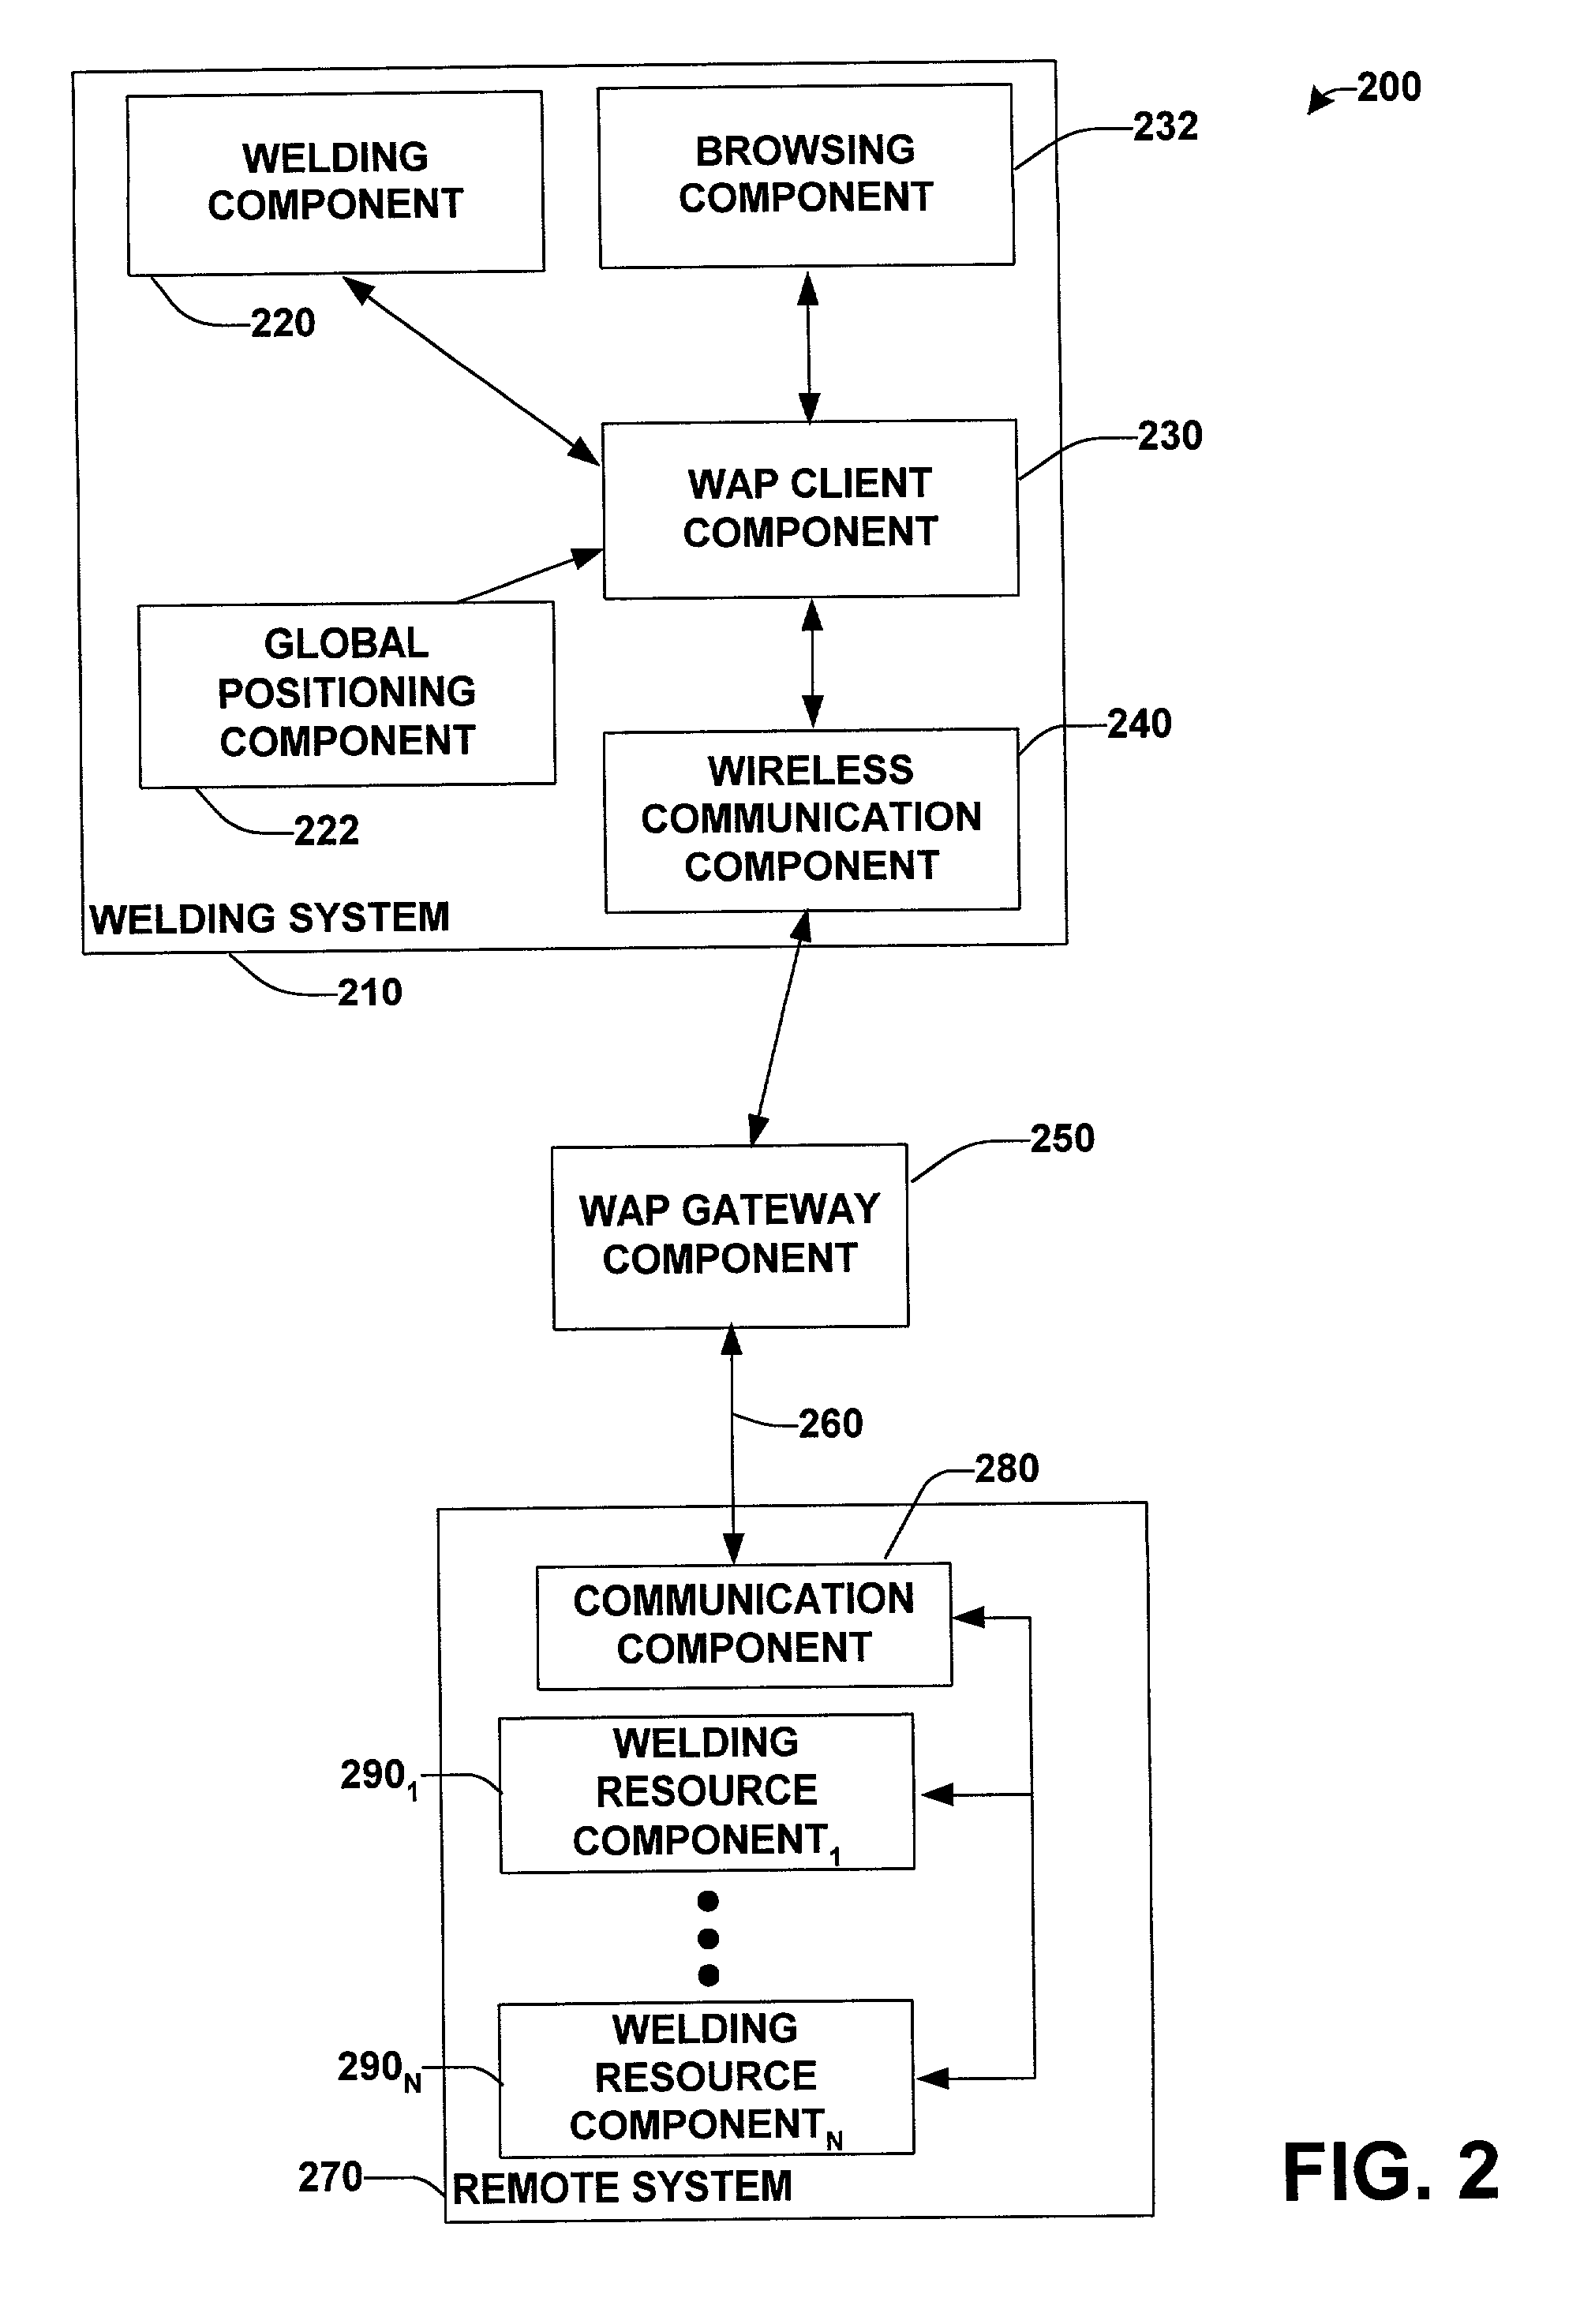 System and method to facilitate wireless wide area communication in a welding environment